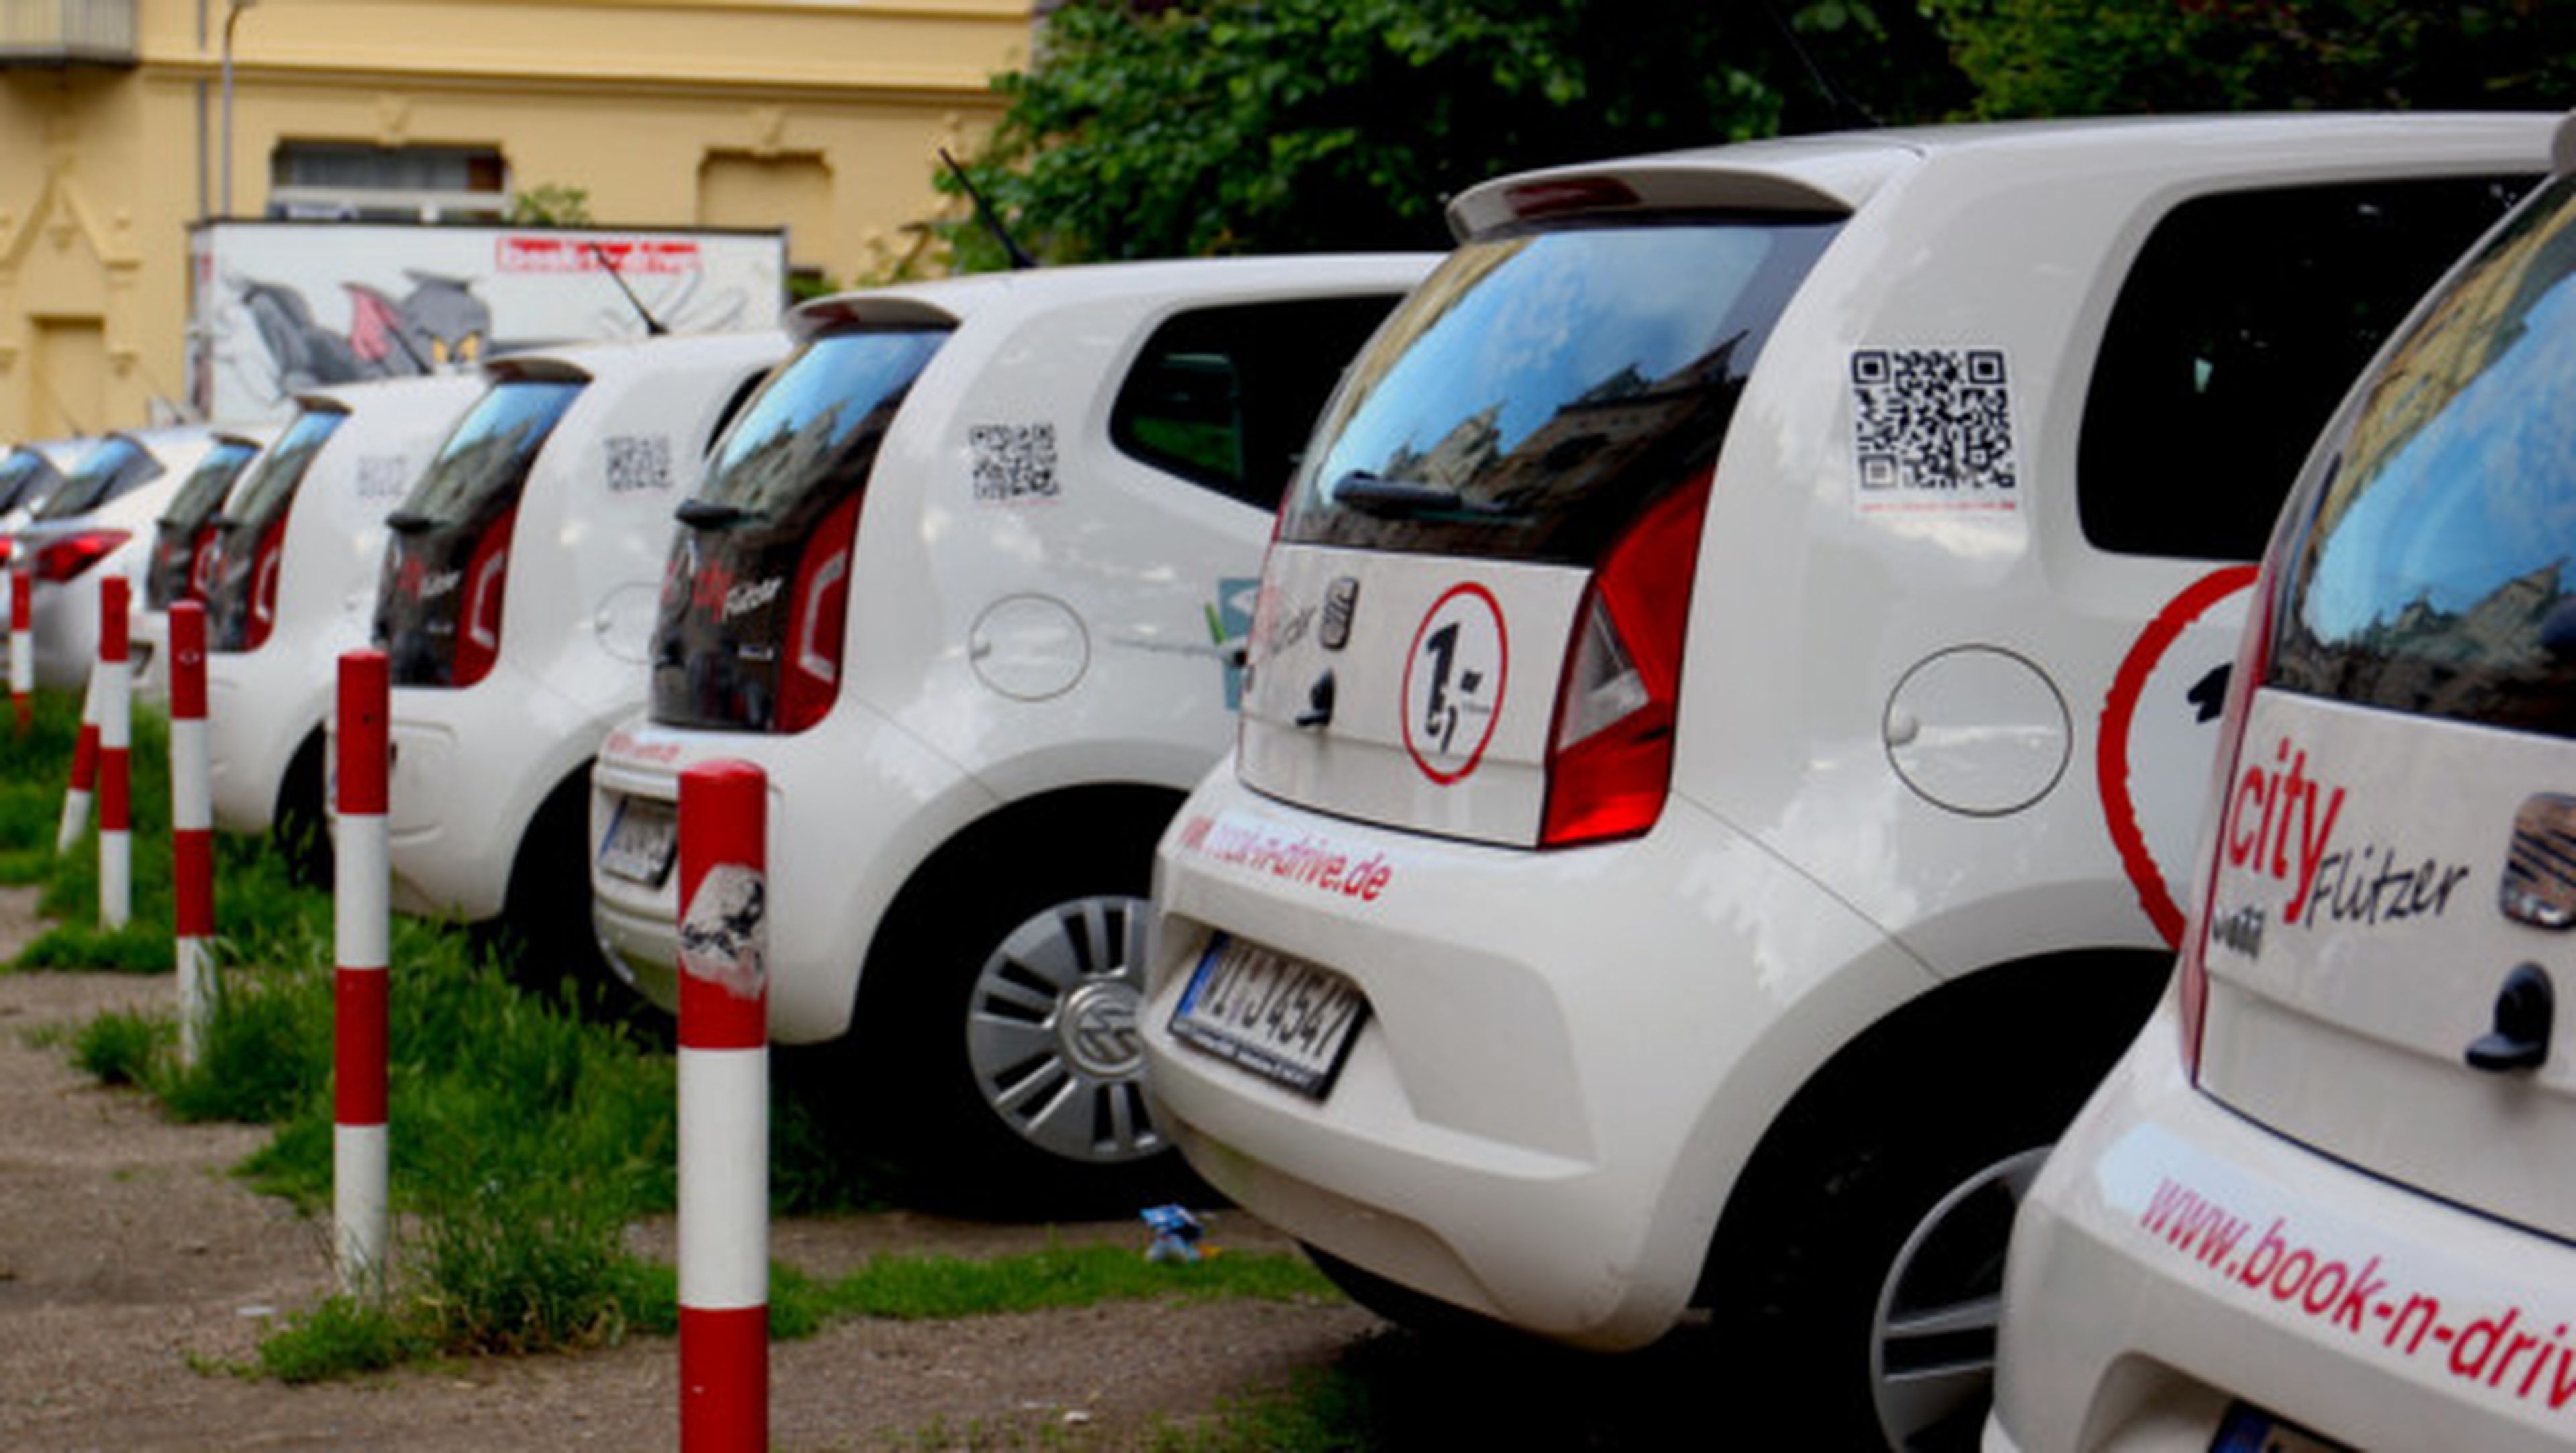 Alquiler de coches Carsharing